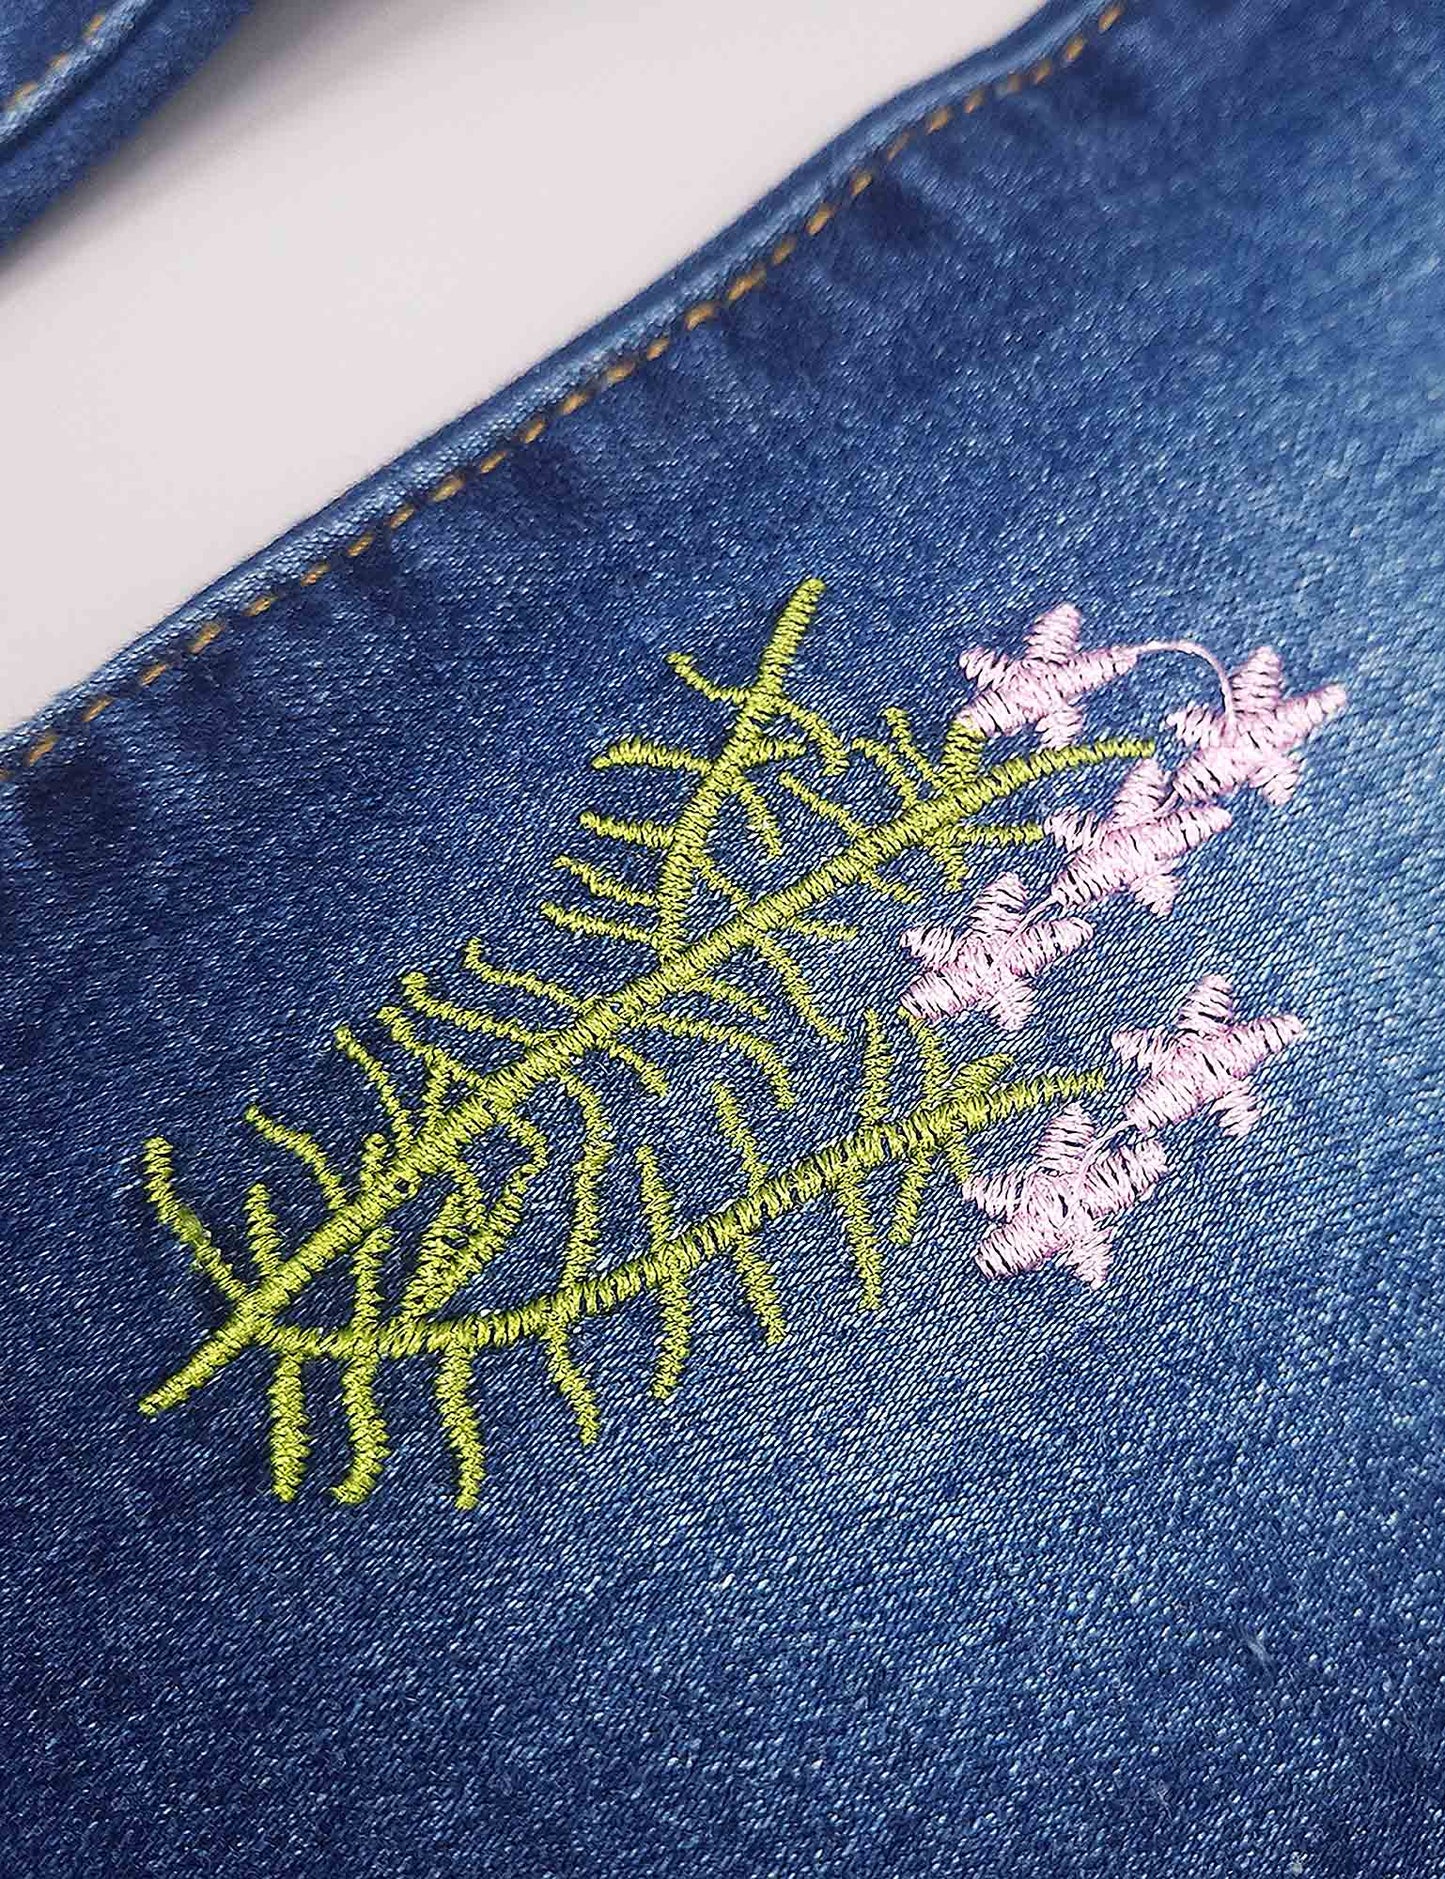 Girls Butterfly Grass Embroidered Slim Jeans Floral Pants